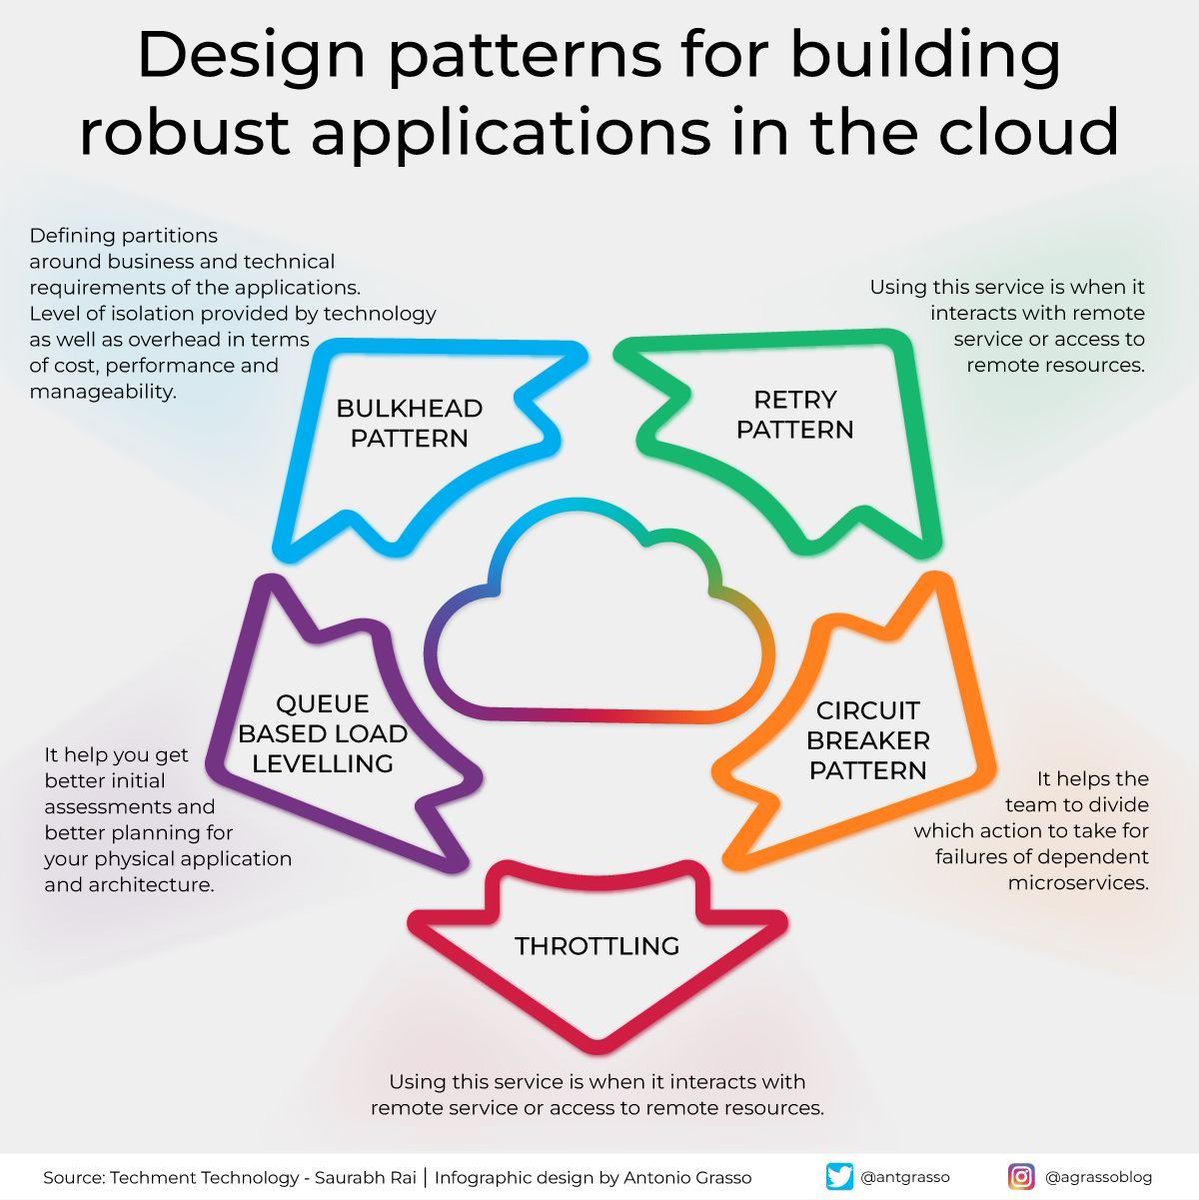 Cloud design patterns provide project managers with tools for robust execution, emphasizing task compartmentalization, resilience, pacing, timely reassessment, and controlled progression - paving the way for seamless management in a complex digital landscape rt @antgrasso